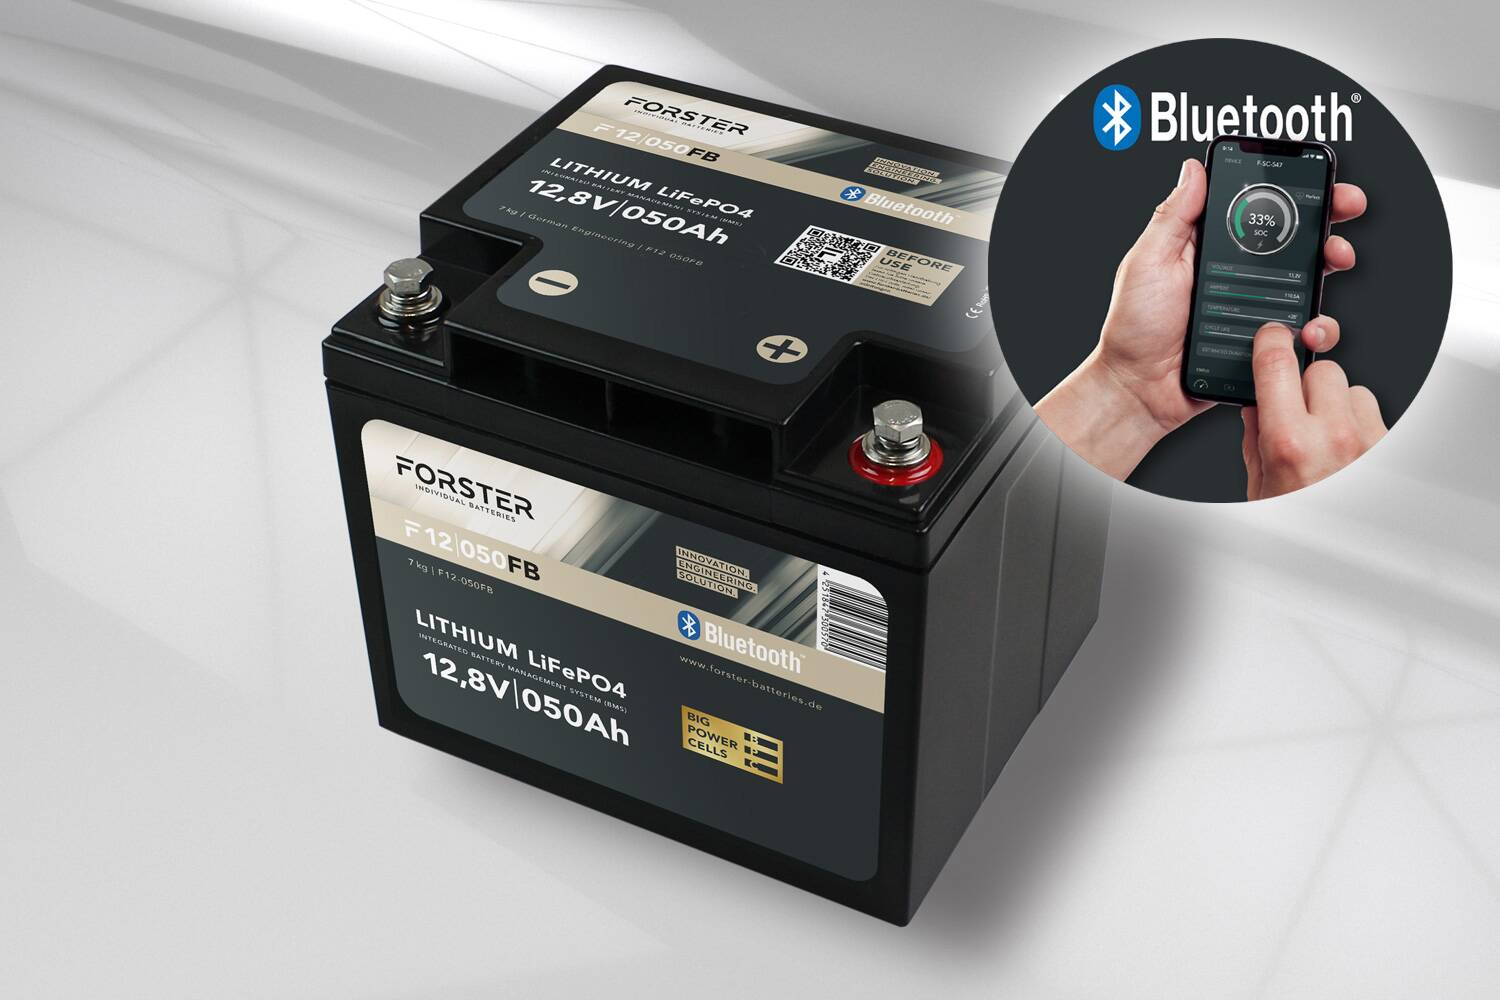 FORSTER 50Ah 12,8V LiFePO4 Lithium Batterie 50A-BMS Smart Bluetooth 512Wh